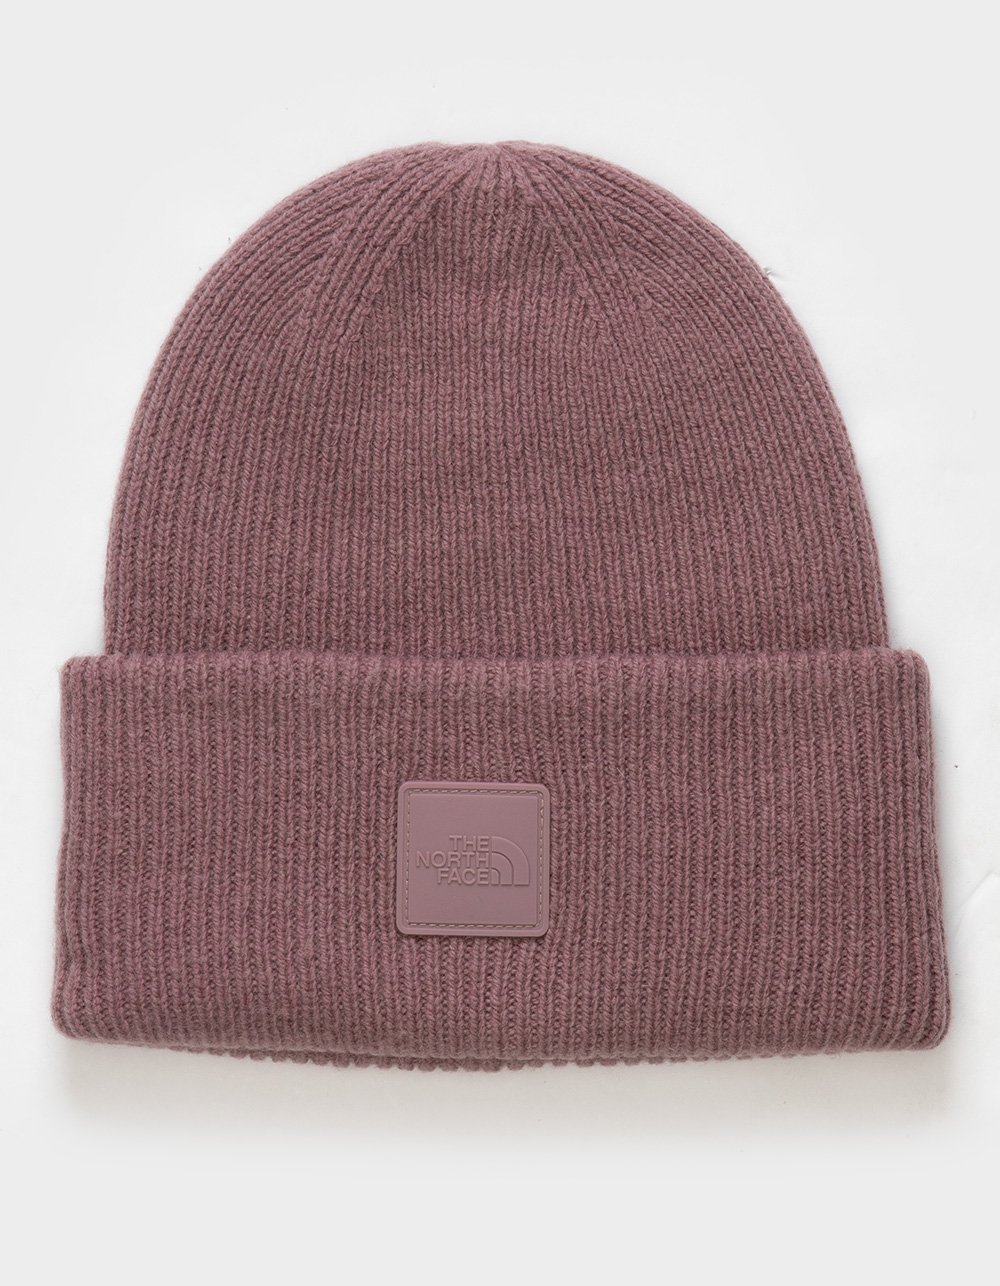 THE NORTH FACE Urban Patch Beanie